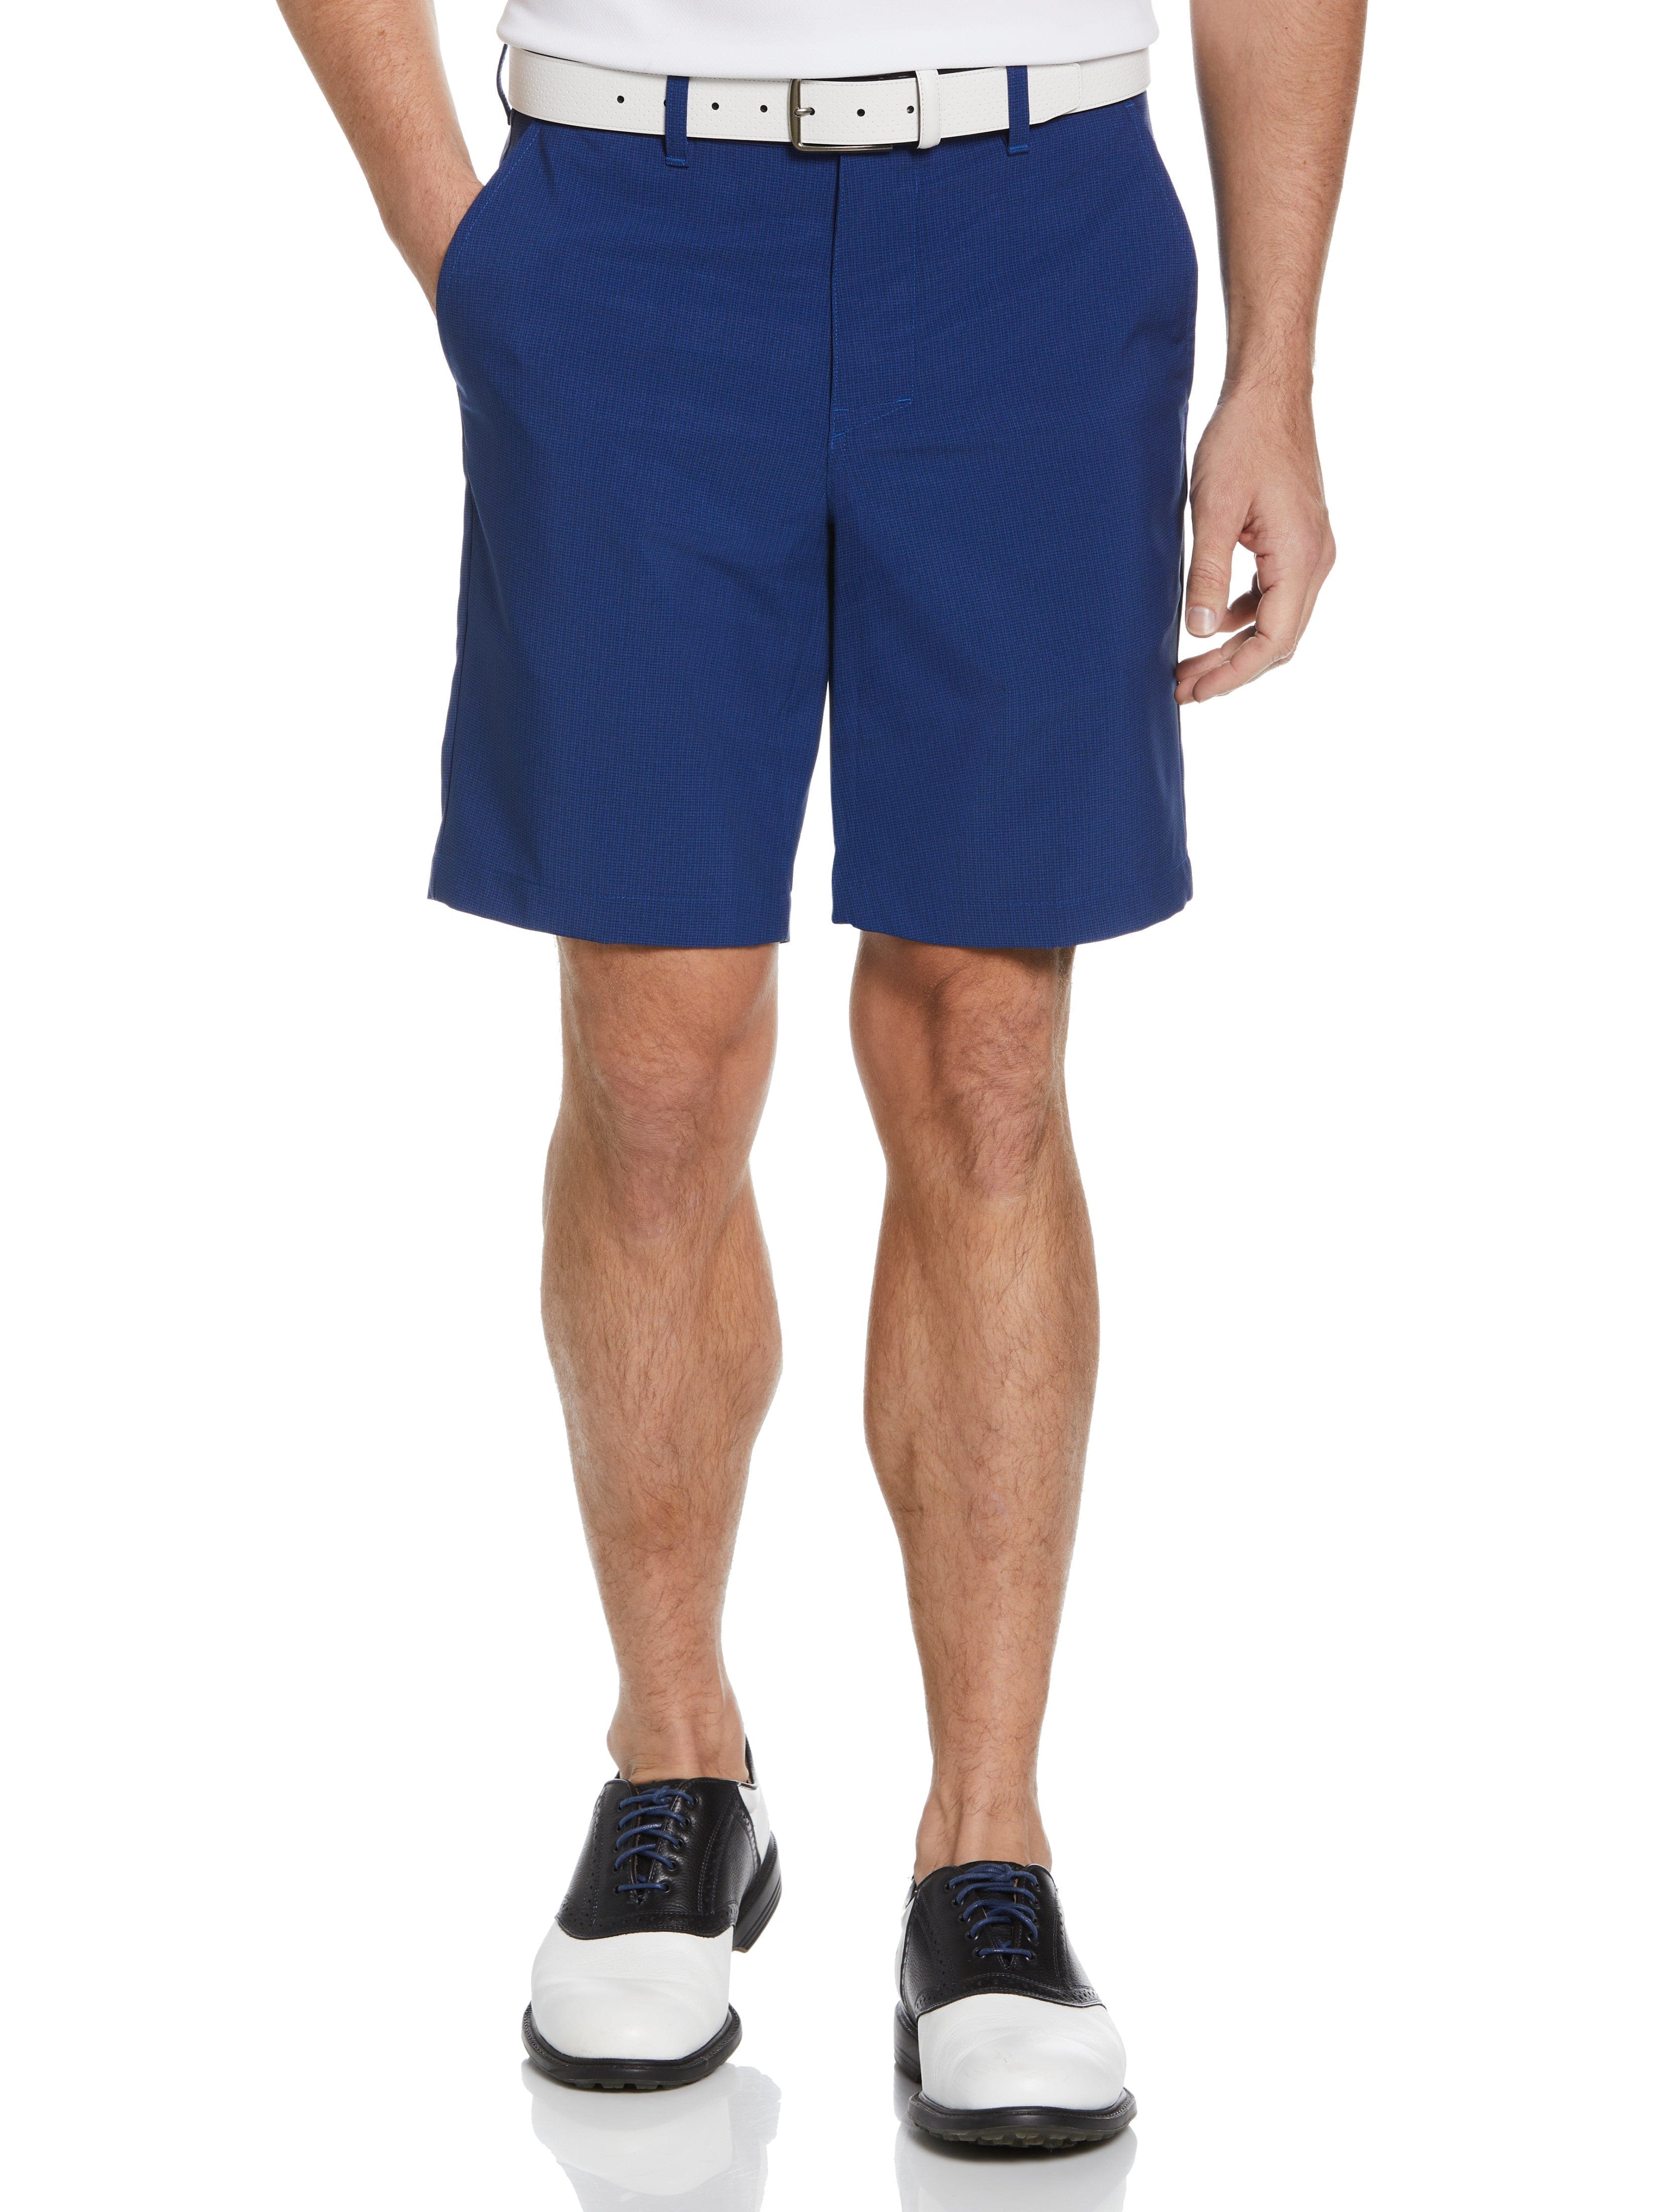 Jack Nicklaus Mens Flat Front Heather Plaid Printed Shorts, Size 36, Classic Navy Blue, Polyester/Elastane | Golf Apparel Shop